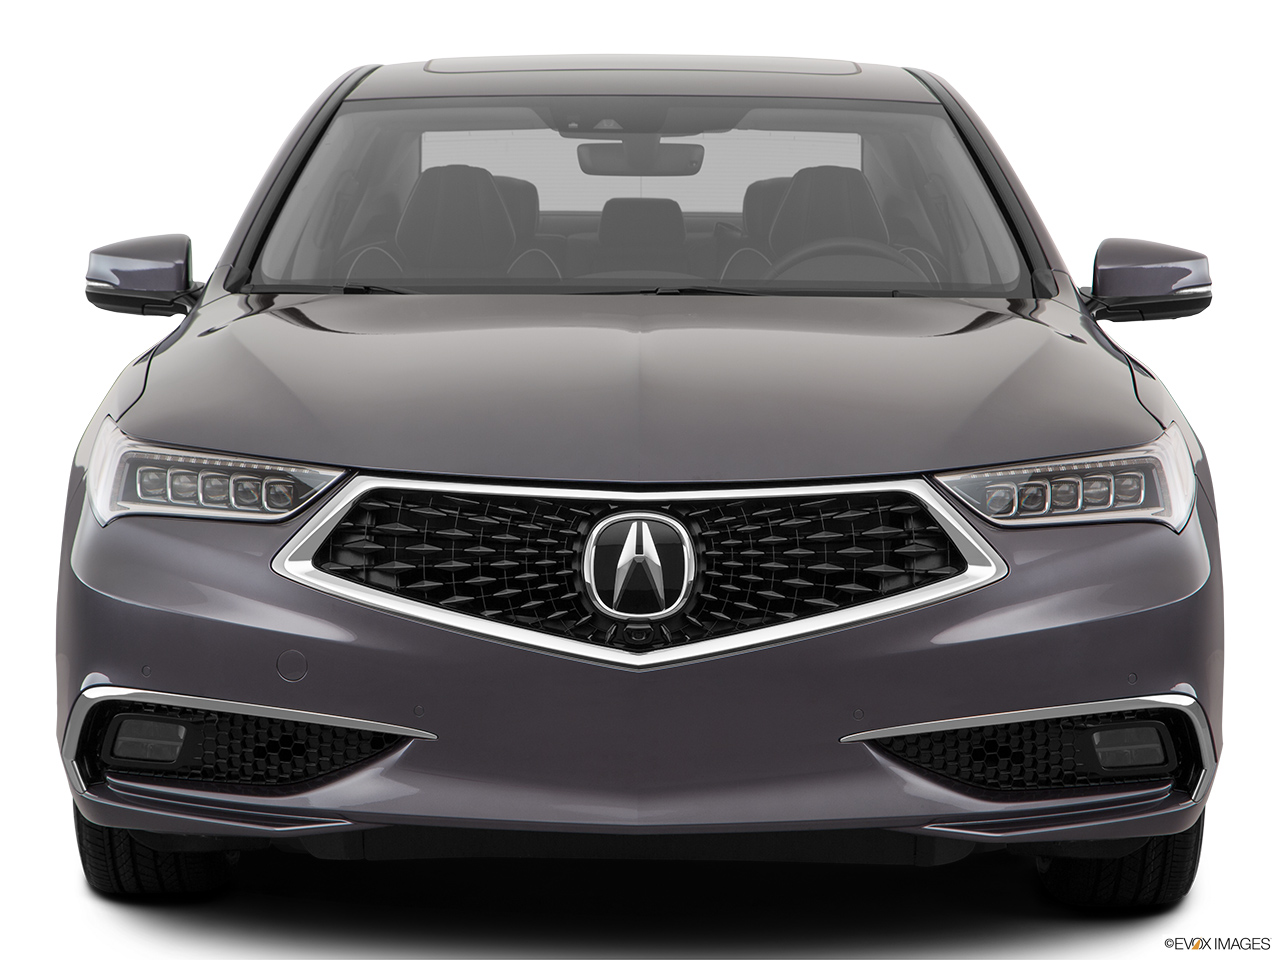 2018 Acura TLX 3.5L Low/wide front. 